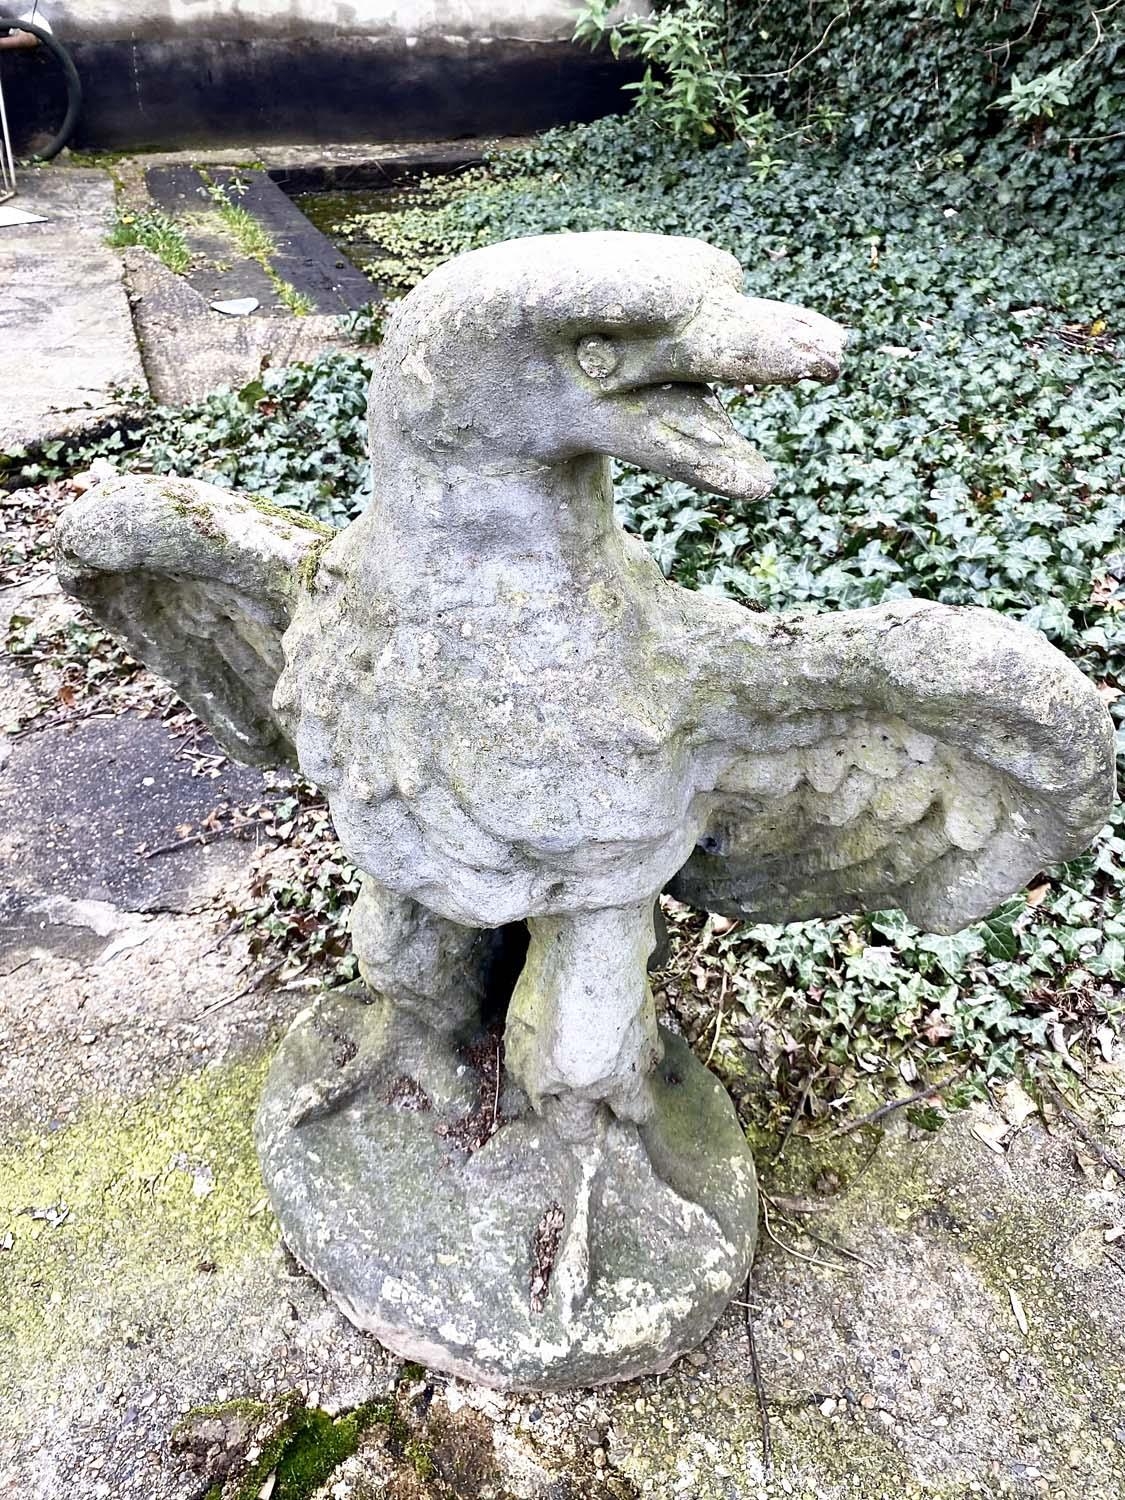 GARDEN STATUE OF AN EAGLE, reconstituted stone in a weathered finish, 81cm H x 75cm W x 46cm D. - Image 2 of 3